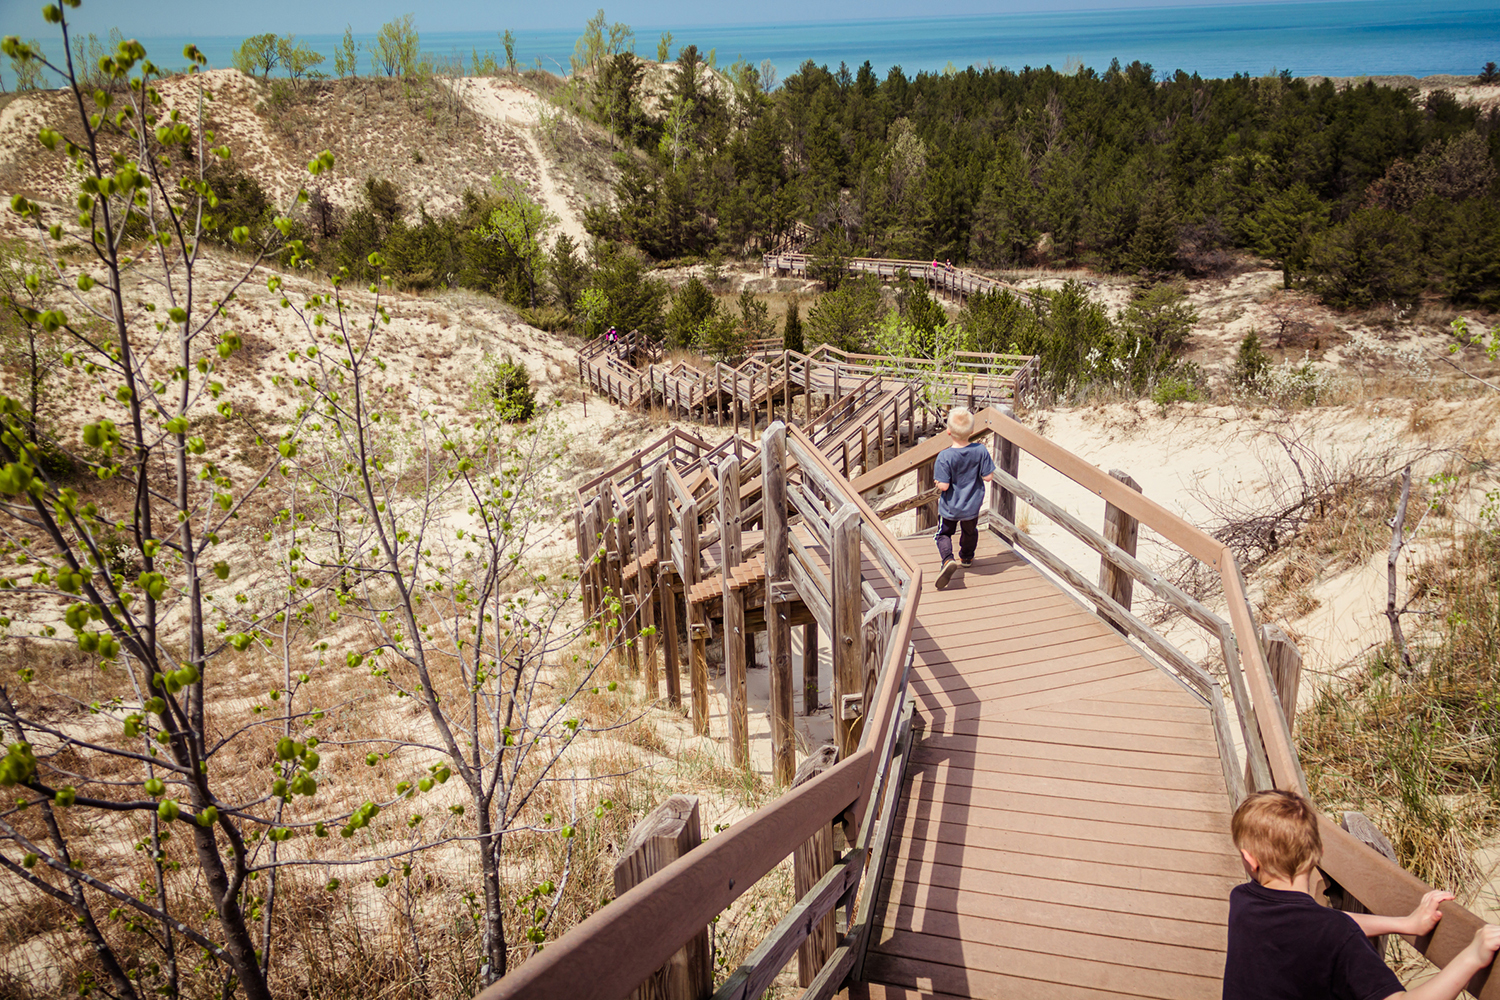 Tourists descend stairs that lead to dunes and forests on a beach.